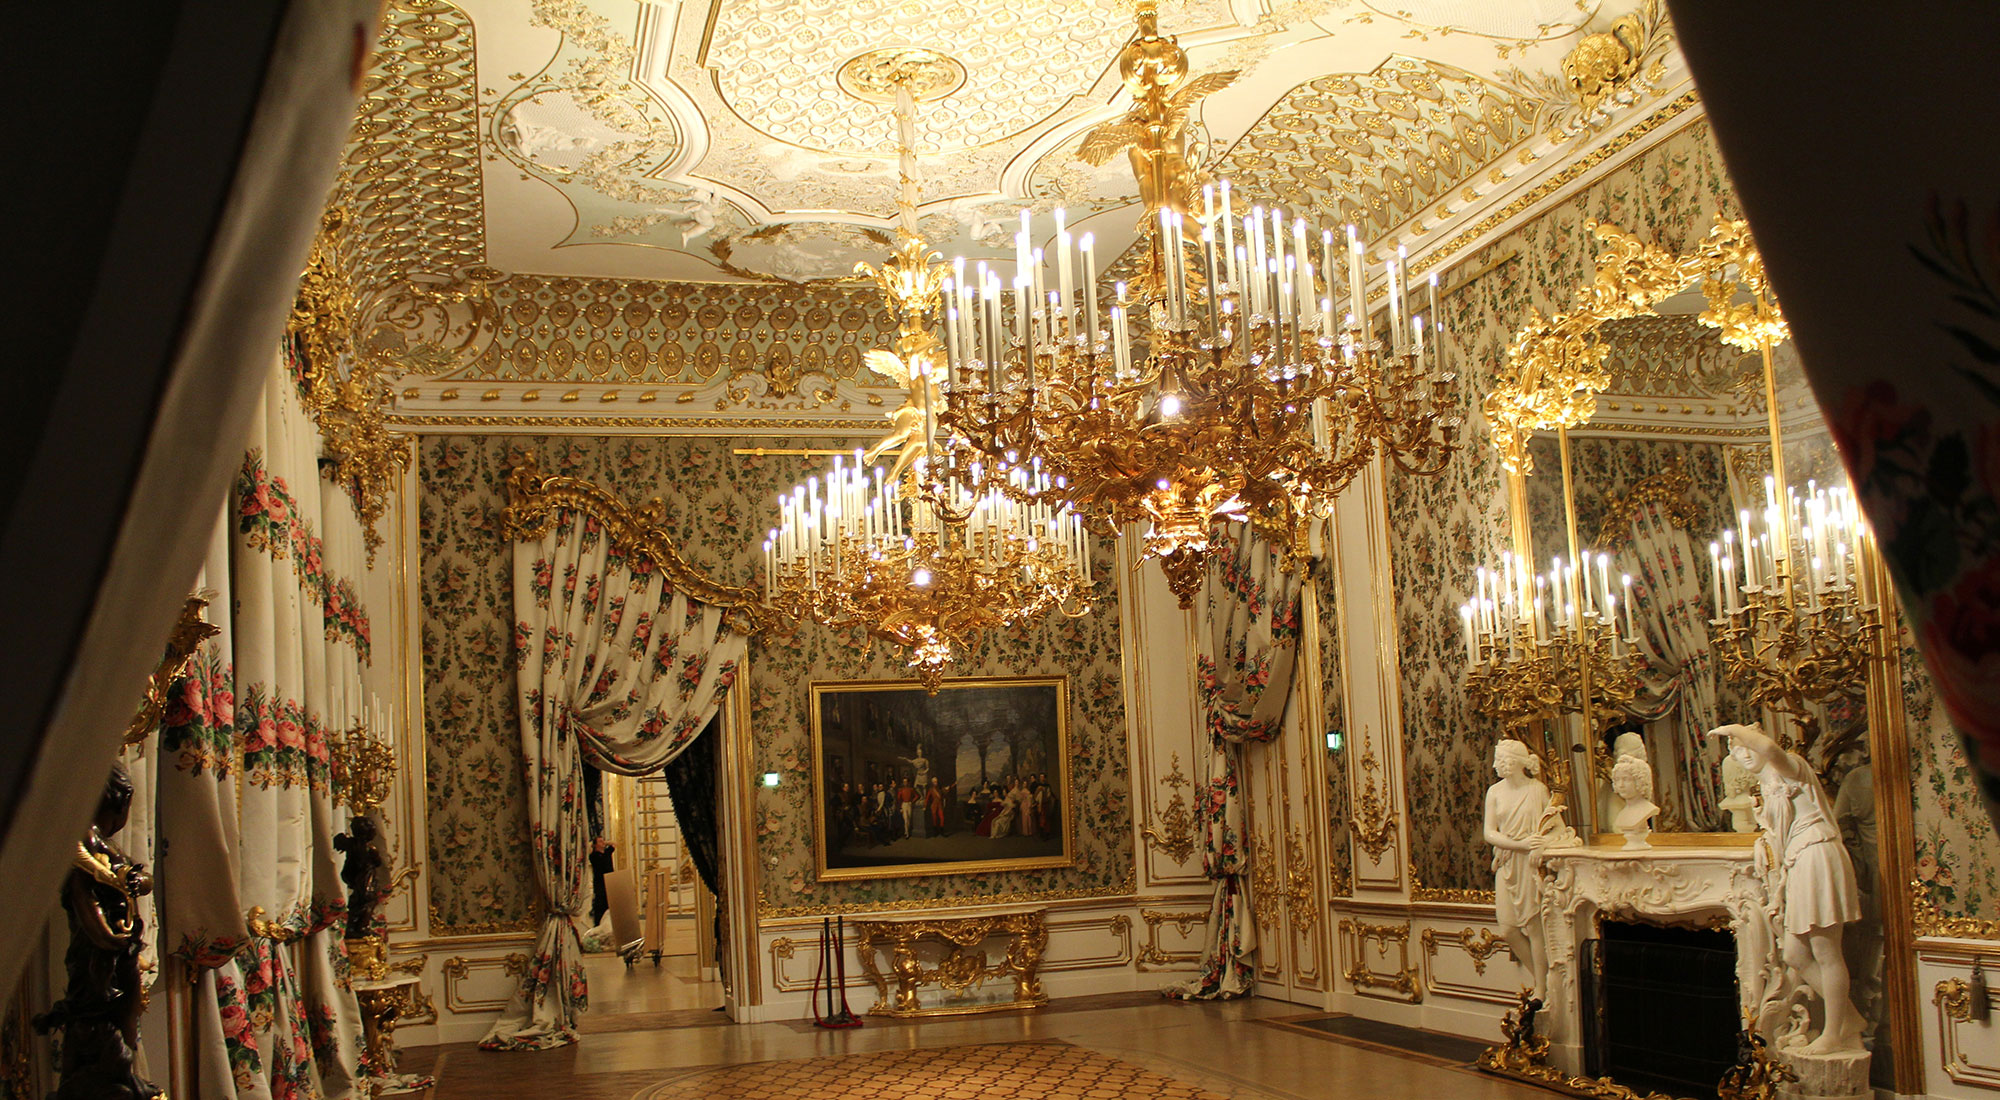 The pair of chandeliers reconstructed from a photo for the "Bouquetsaal"